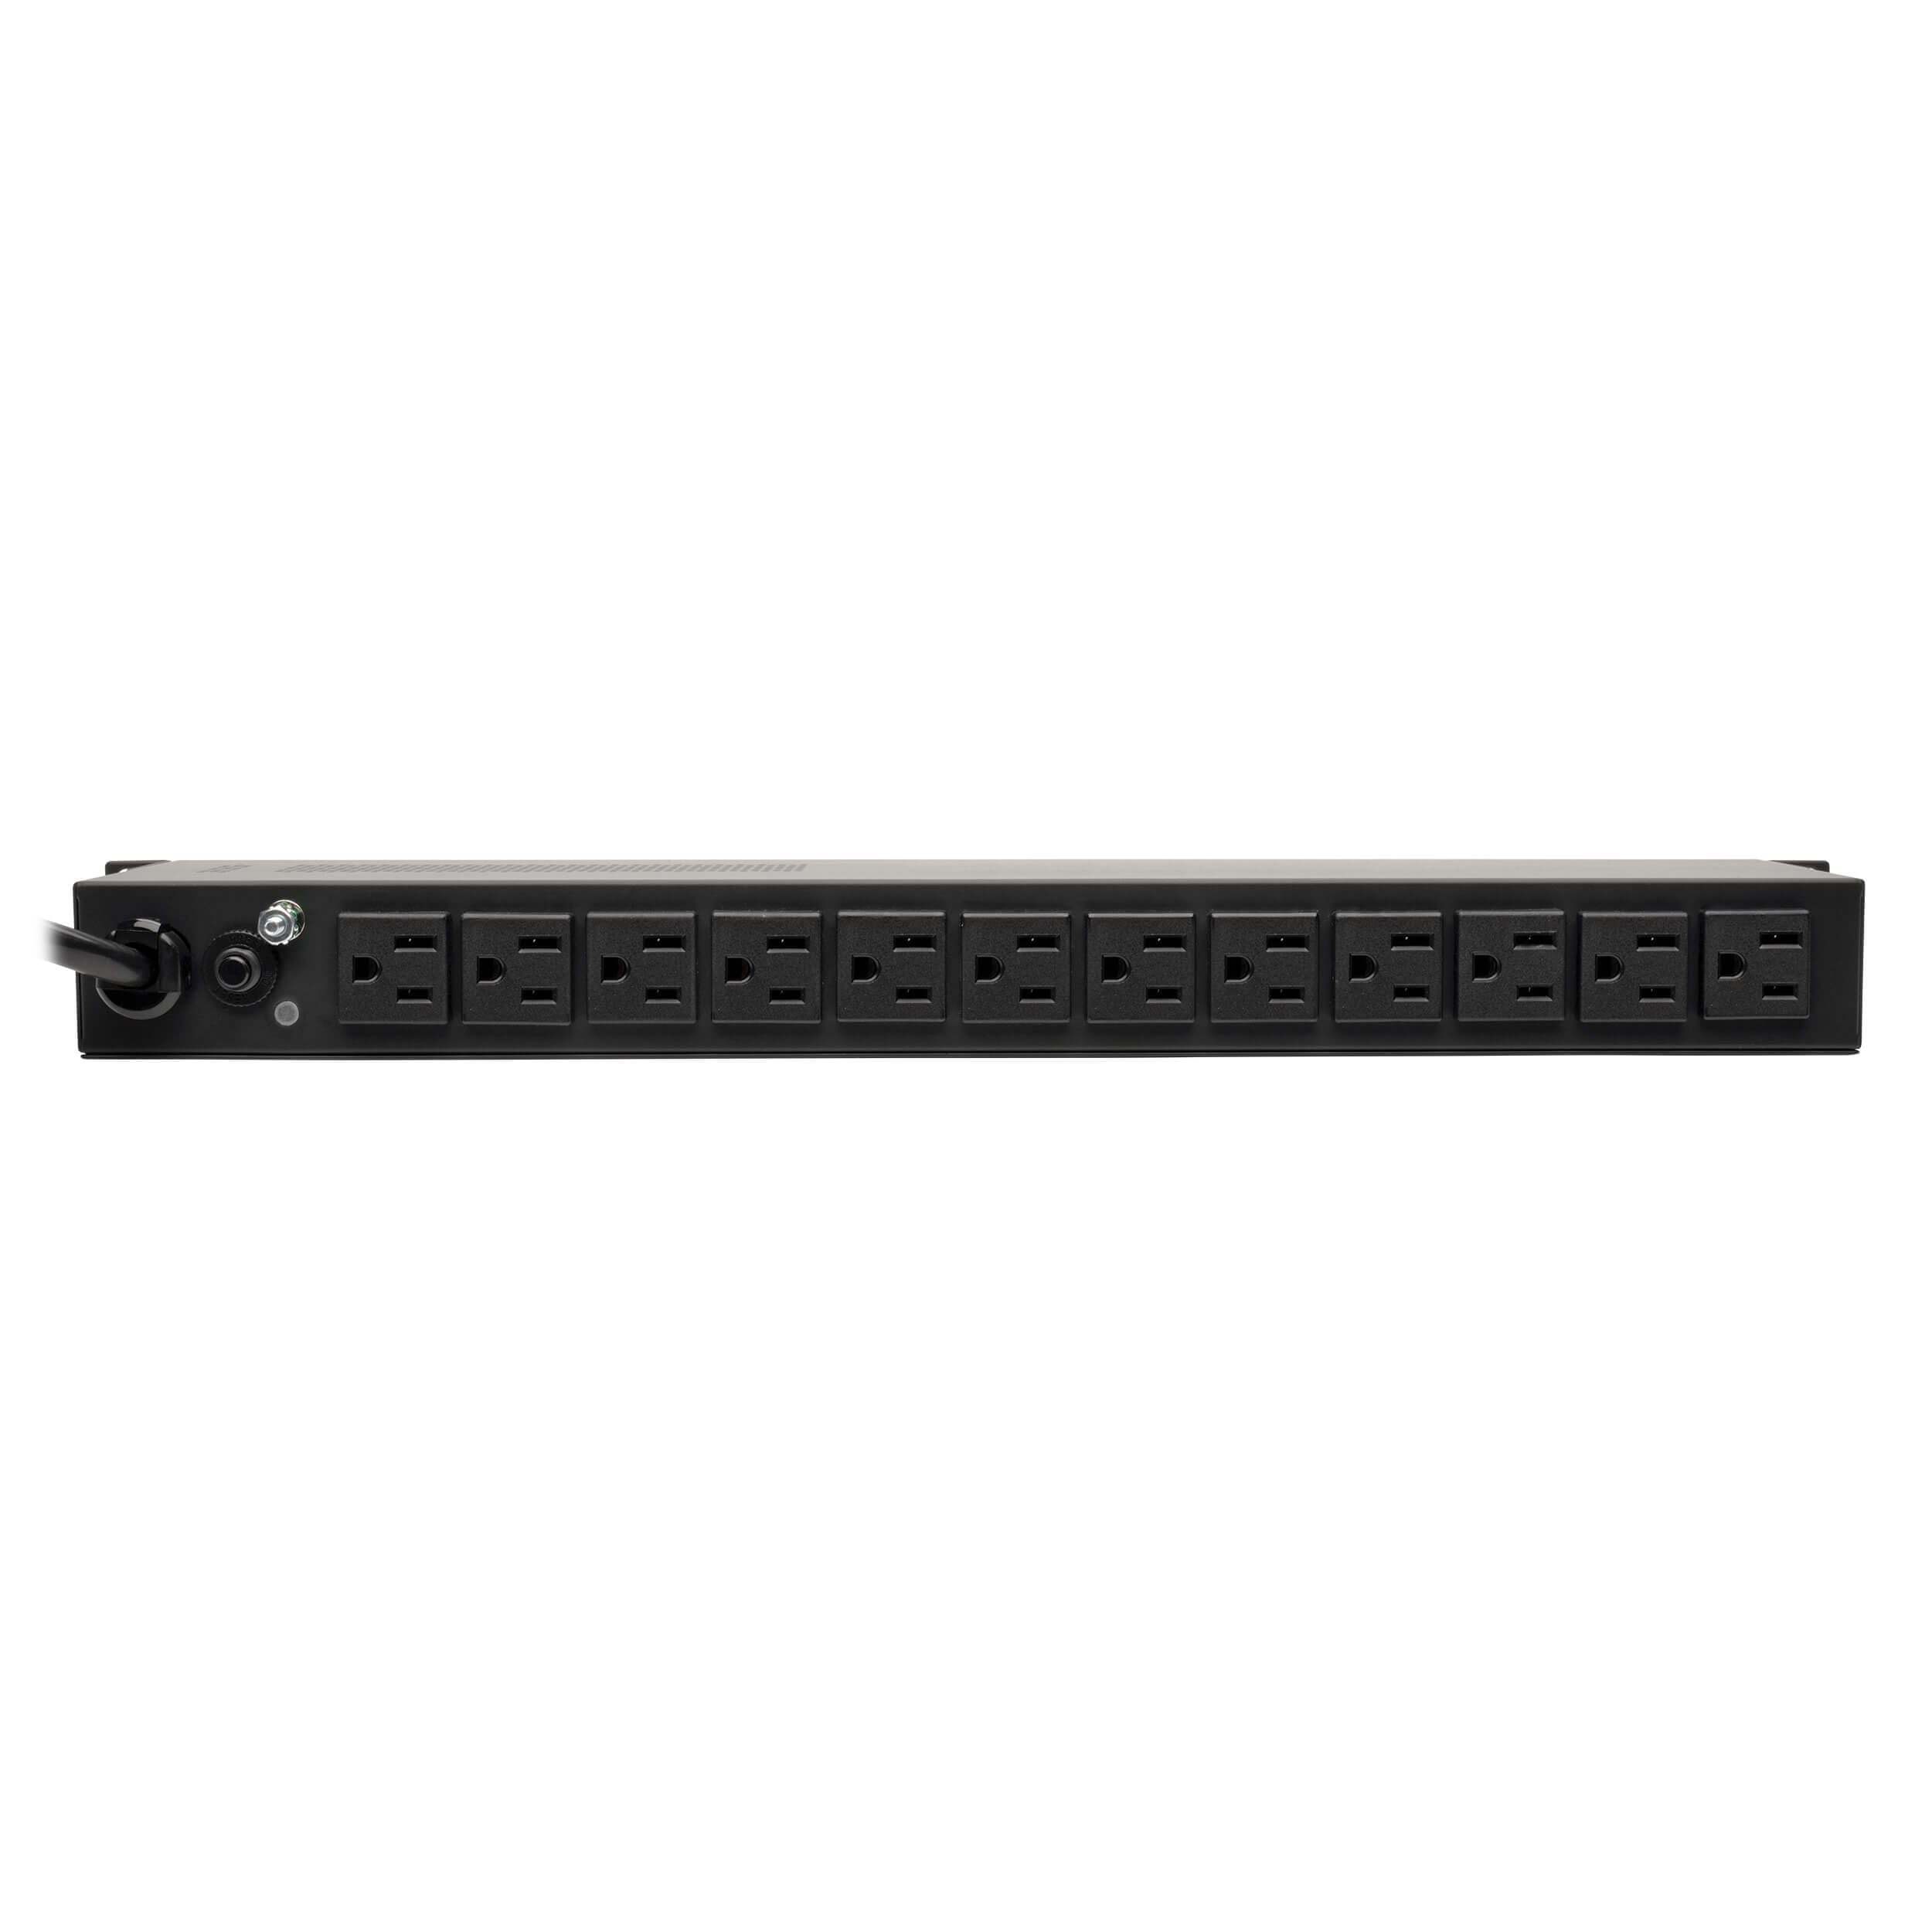 Tripp Lite Metered PDU, 15A, Isobar Surge Suppression, 3840J, 14 Outlets (5-15R), 120V, 5-15P, 15 ft. Cord, 1U Rack-Mount Power (PDUMH15-ISO)